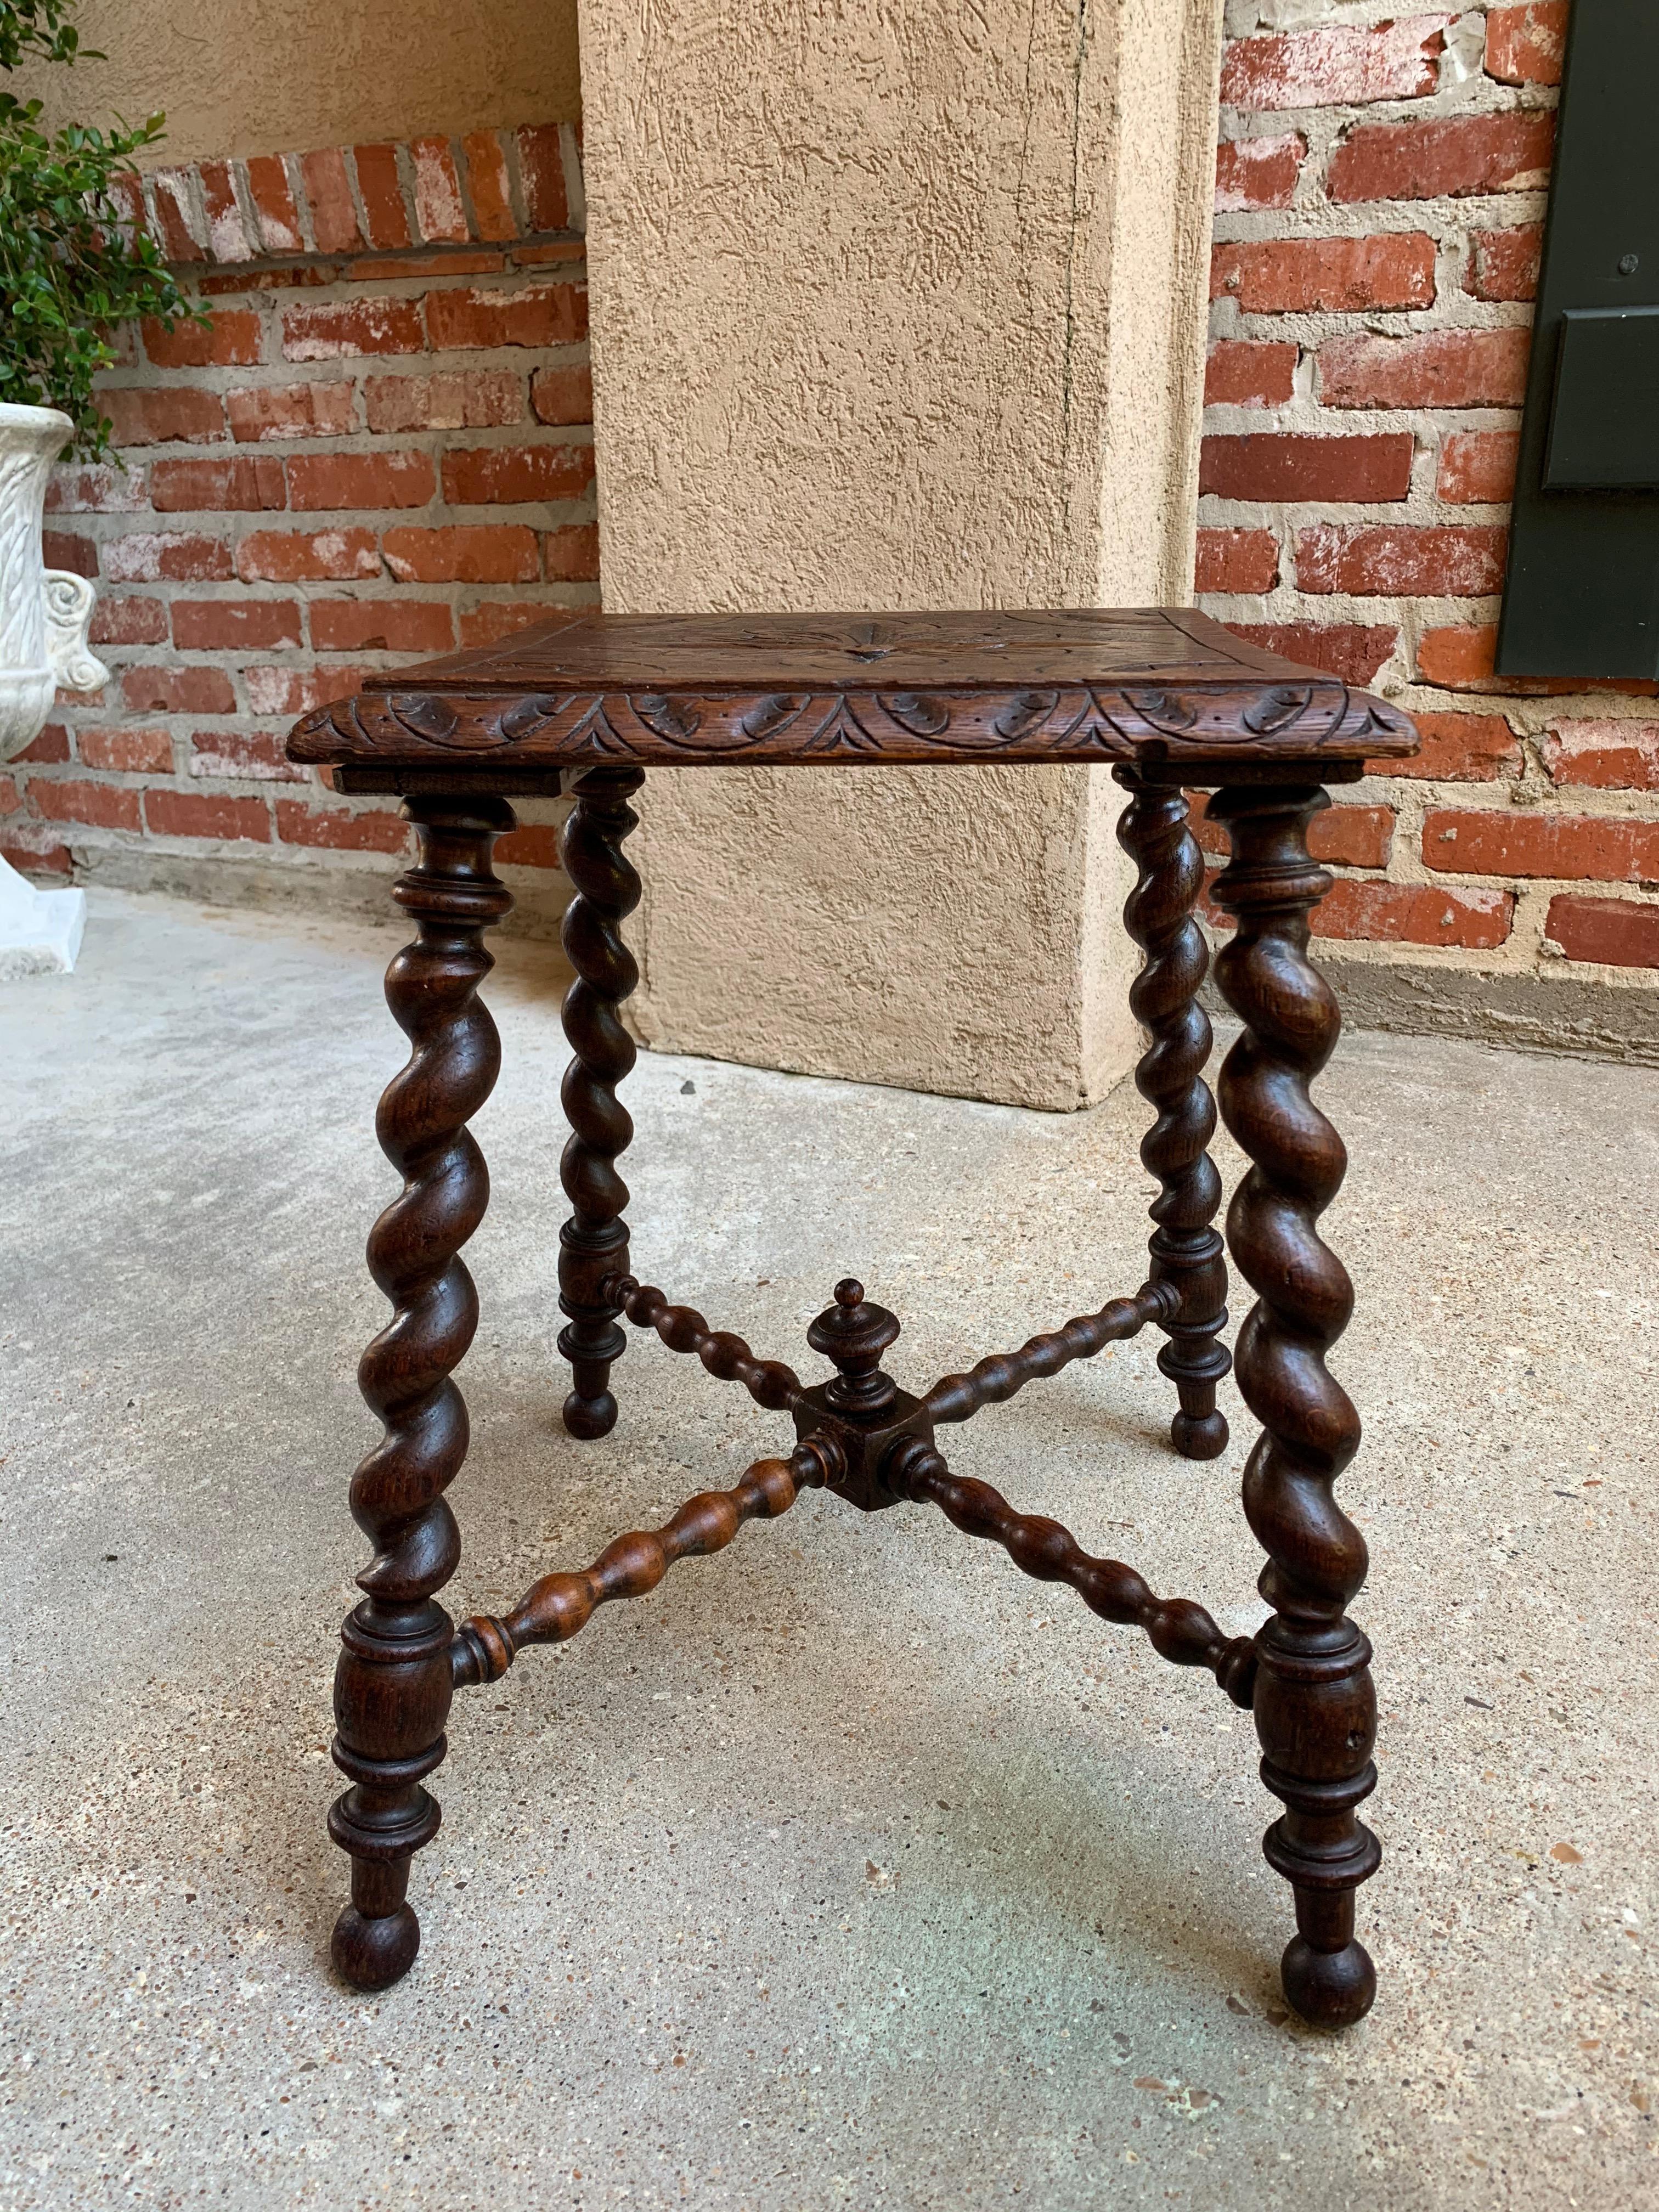 Wood Antique English Carved Oak Barley Twist Bench Stool Kettle Stand Table